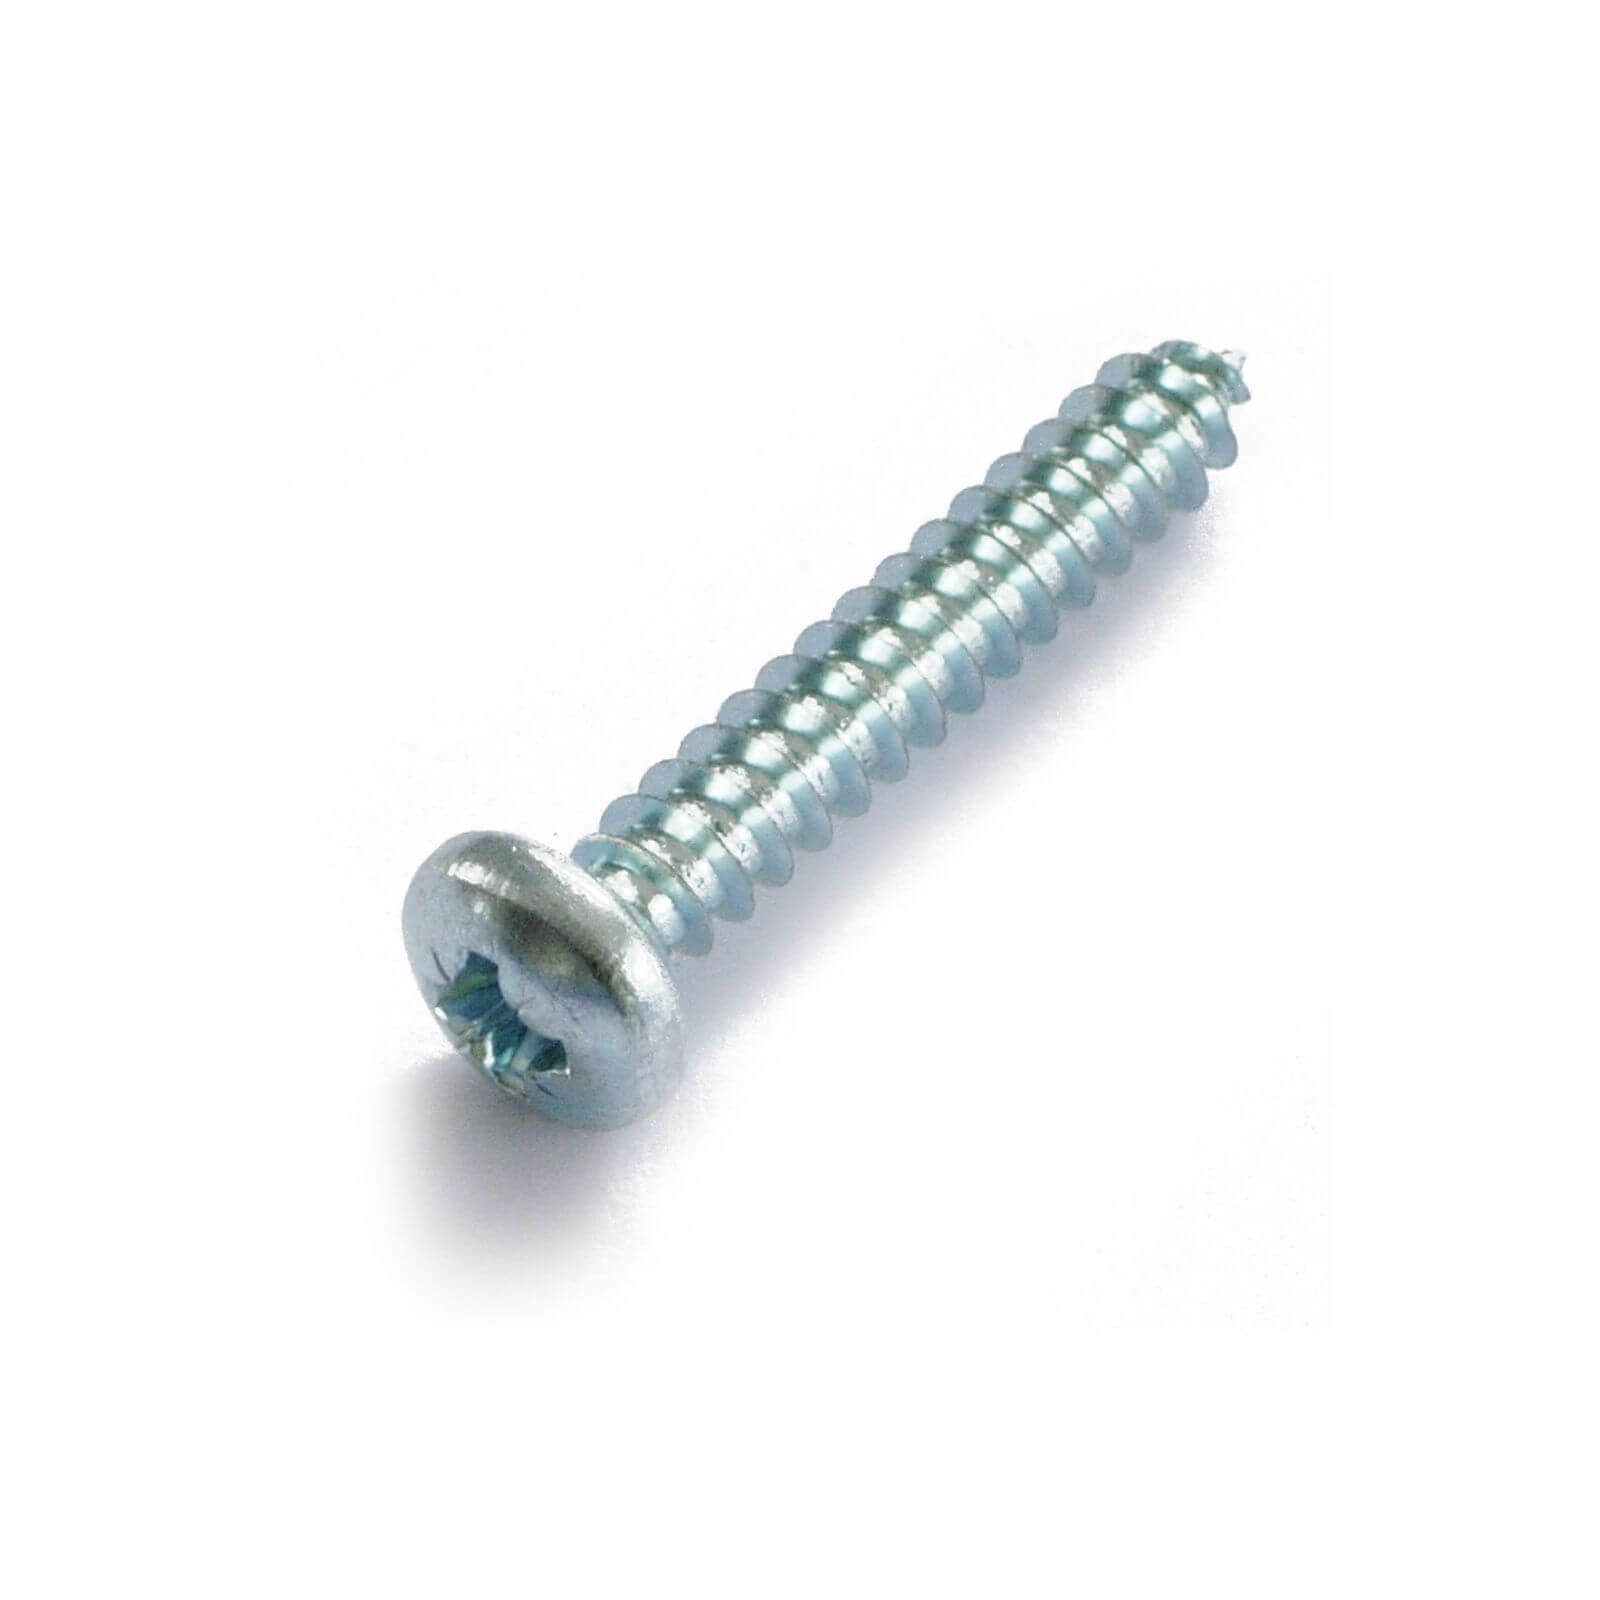 Self Tapping Screw - Bright Zinc Plated - 5 x 12mm - 10 Pack